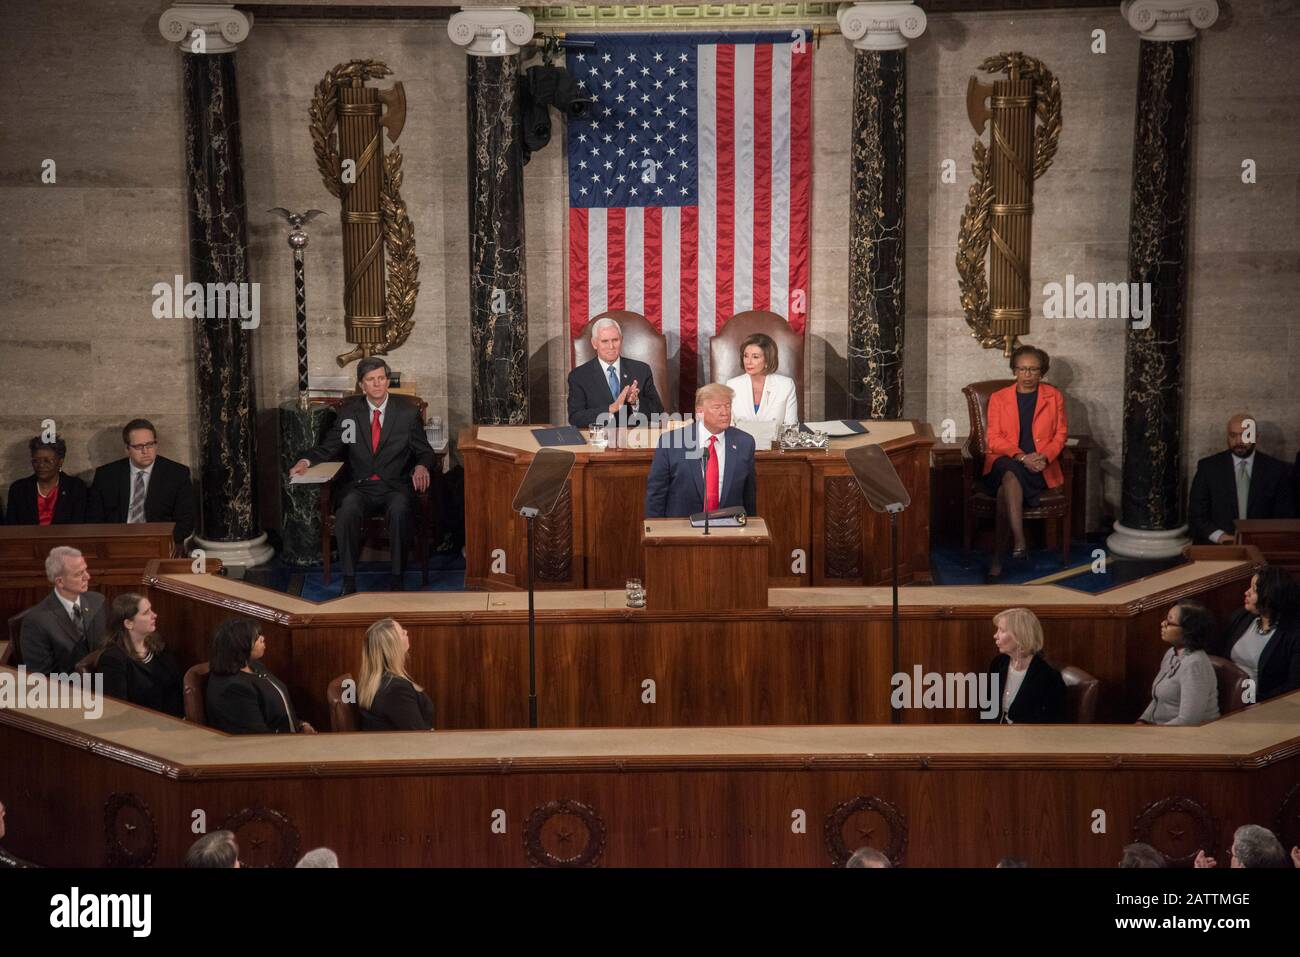 Washington DC,  February 4 2020-President Donald J. Trump gives his third State of the Union address to the combined Members of the House of Represent Stock Photo